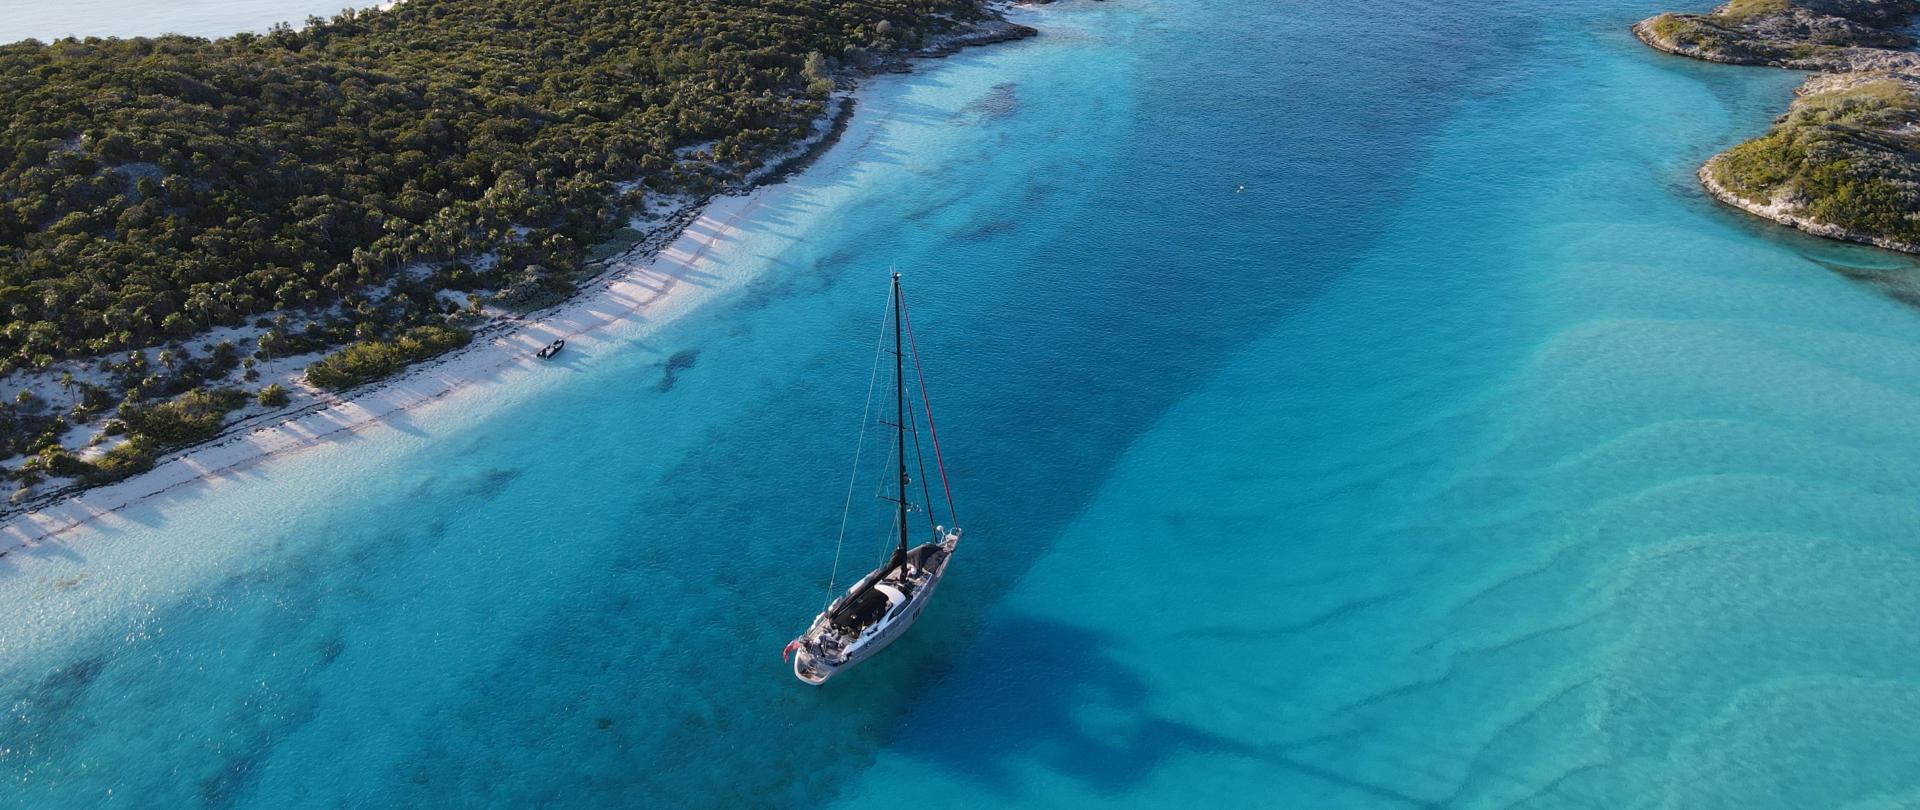 Oyster 725.01 Intrepid Bahamas Aerial View